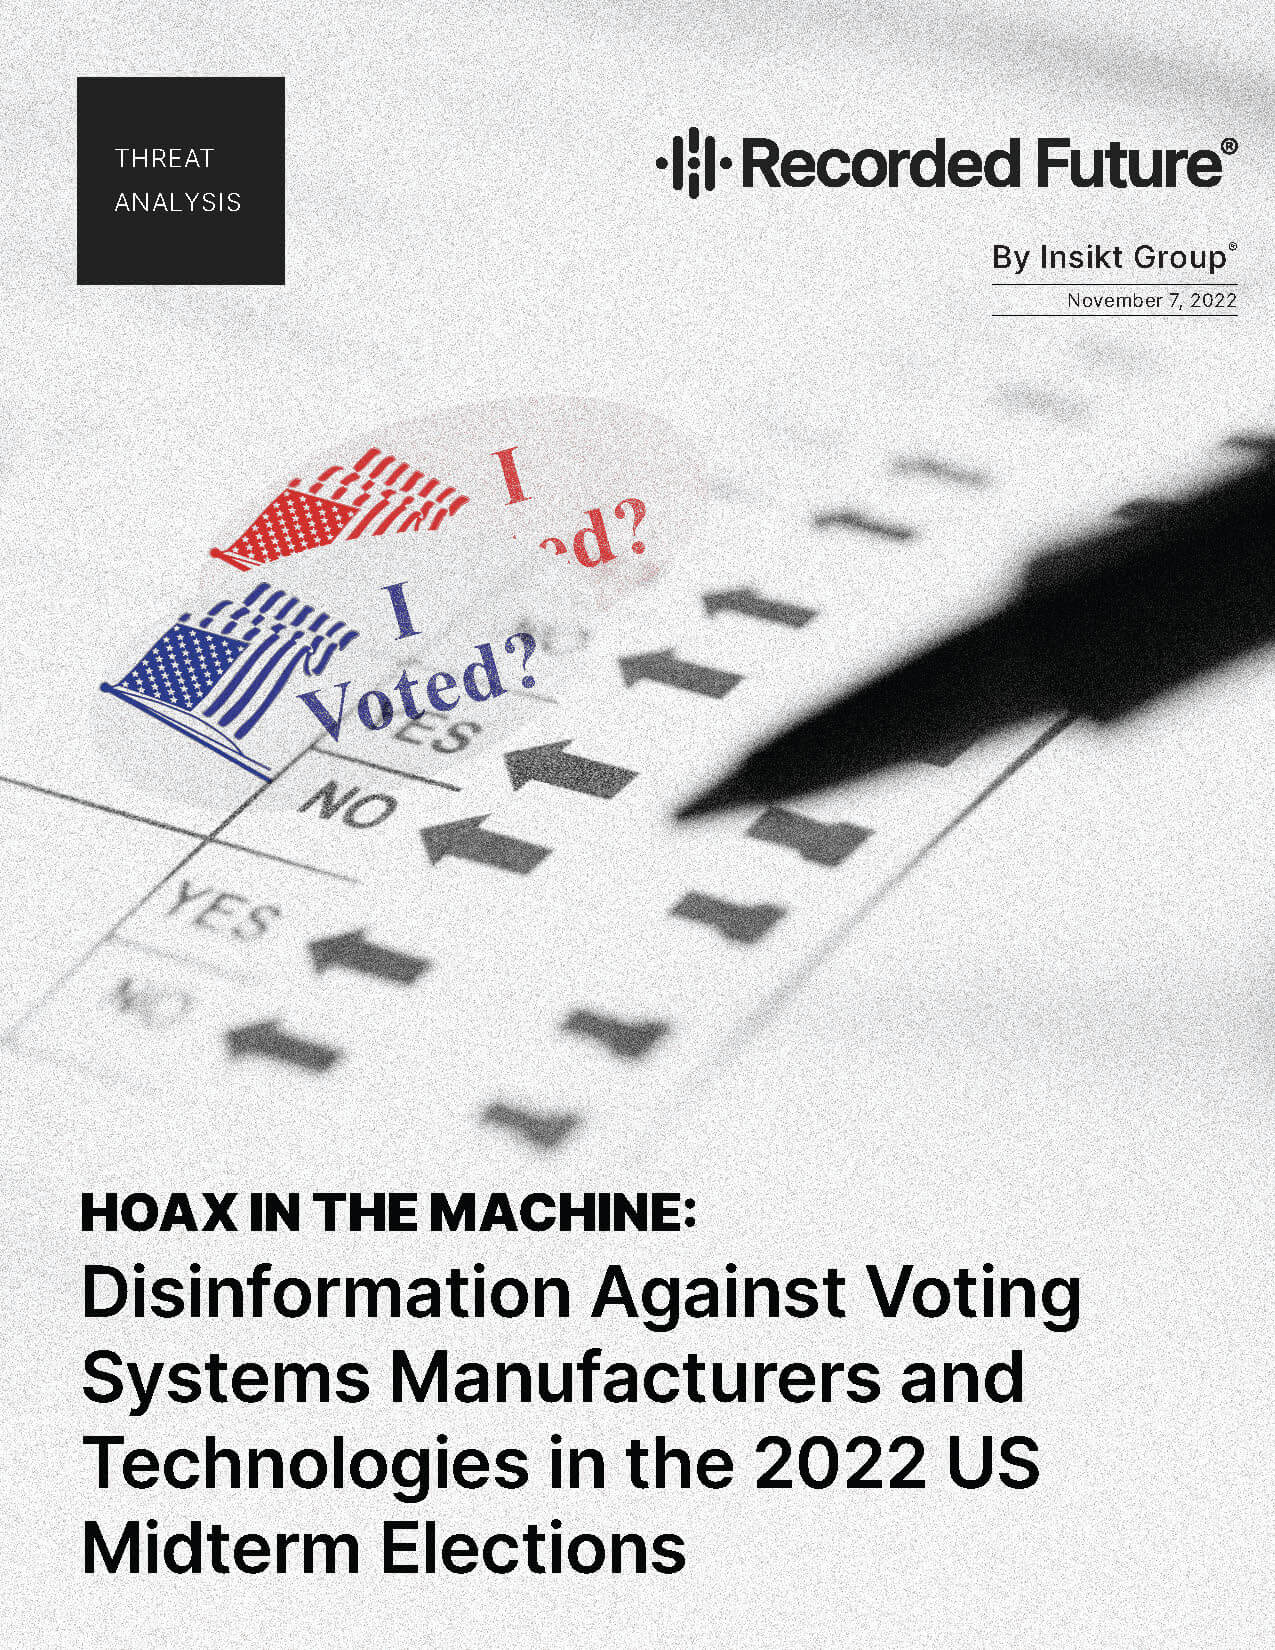 Hoax in the Machine: Disinformation Against Voting Systems Manufacturers and Technologies in the 2022 US Midterm Elections